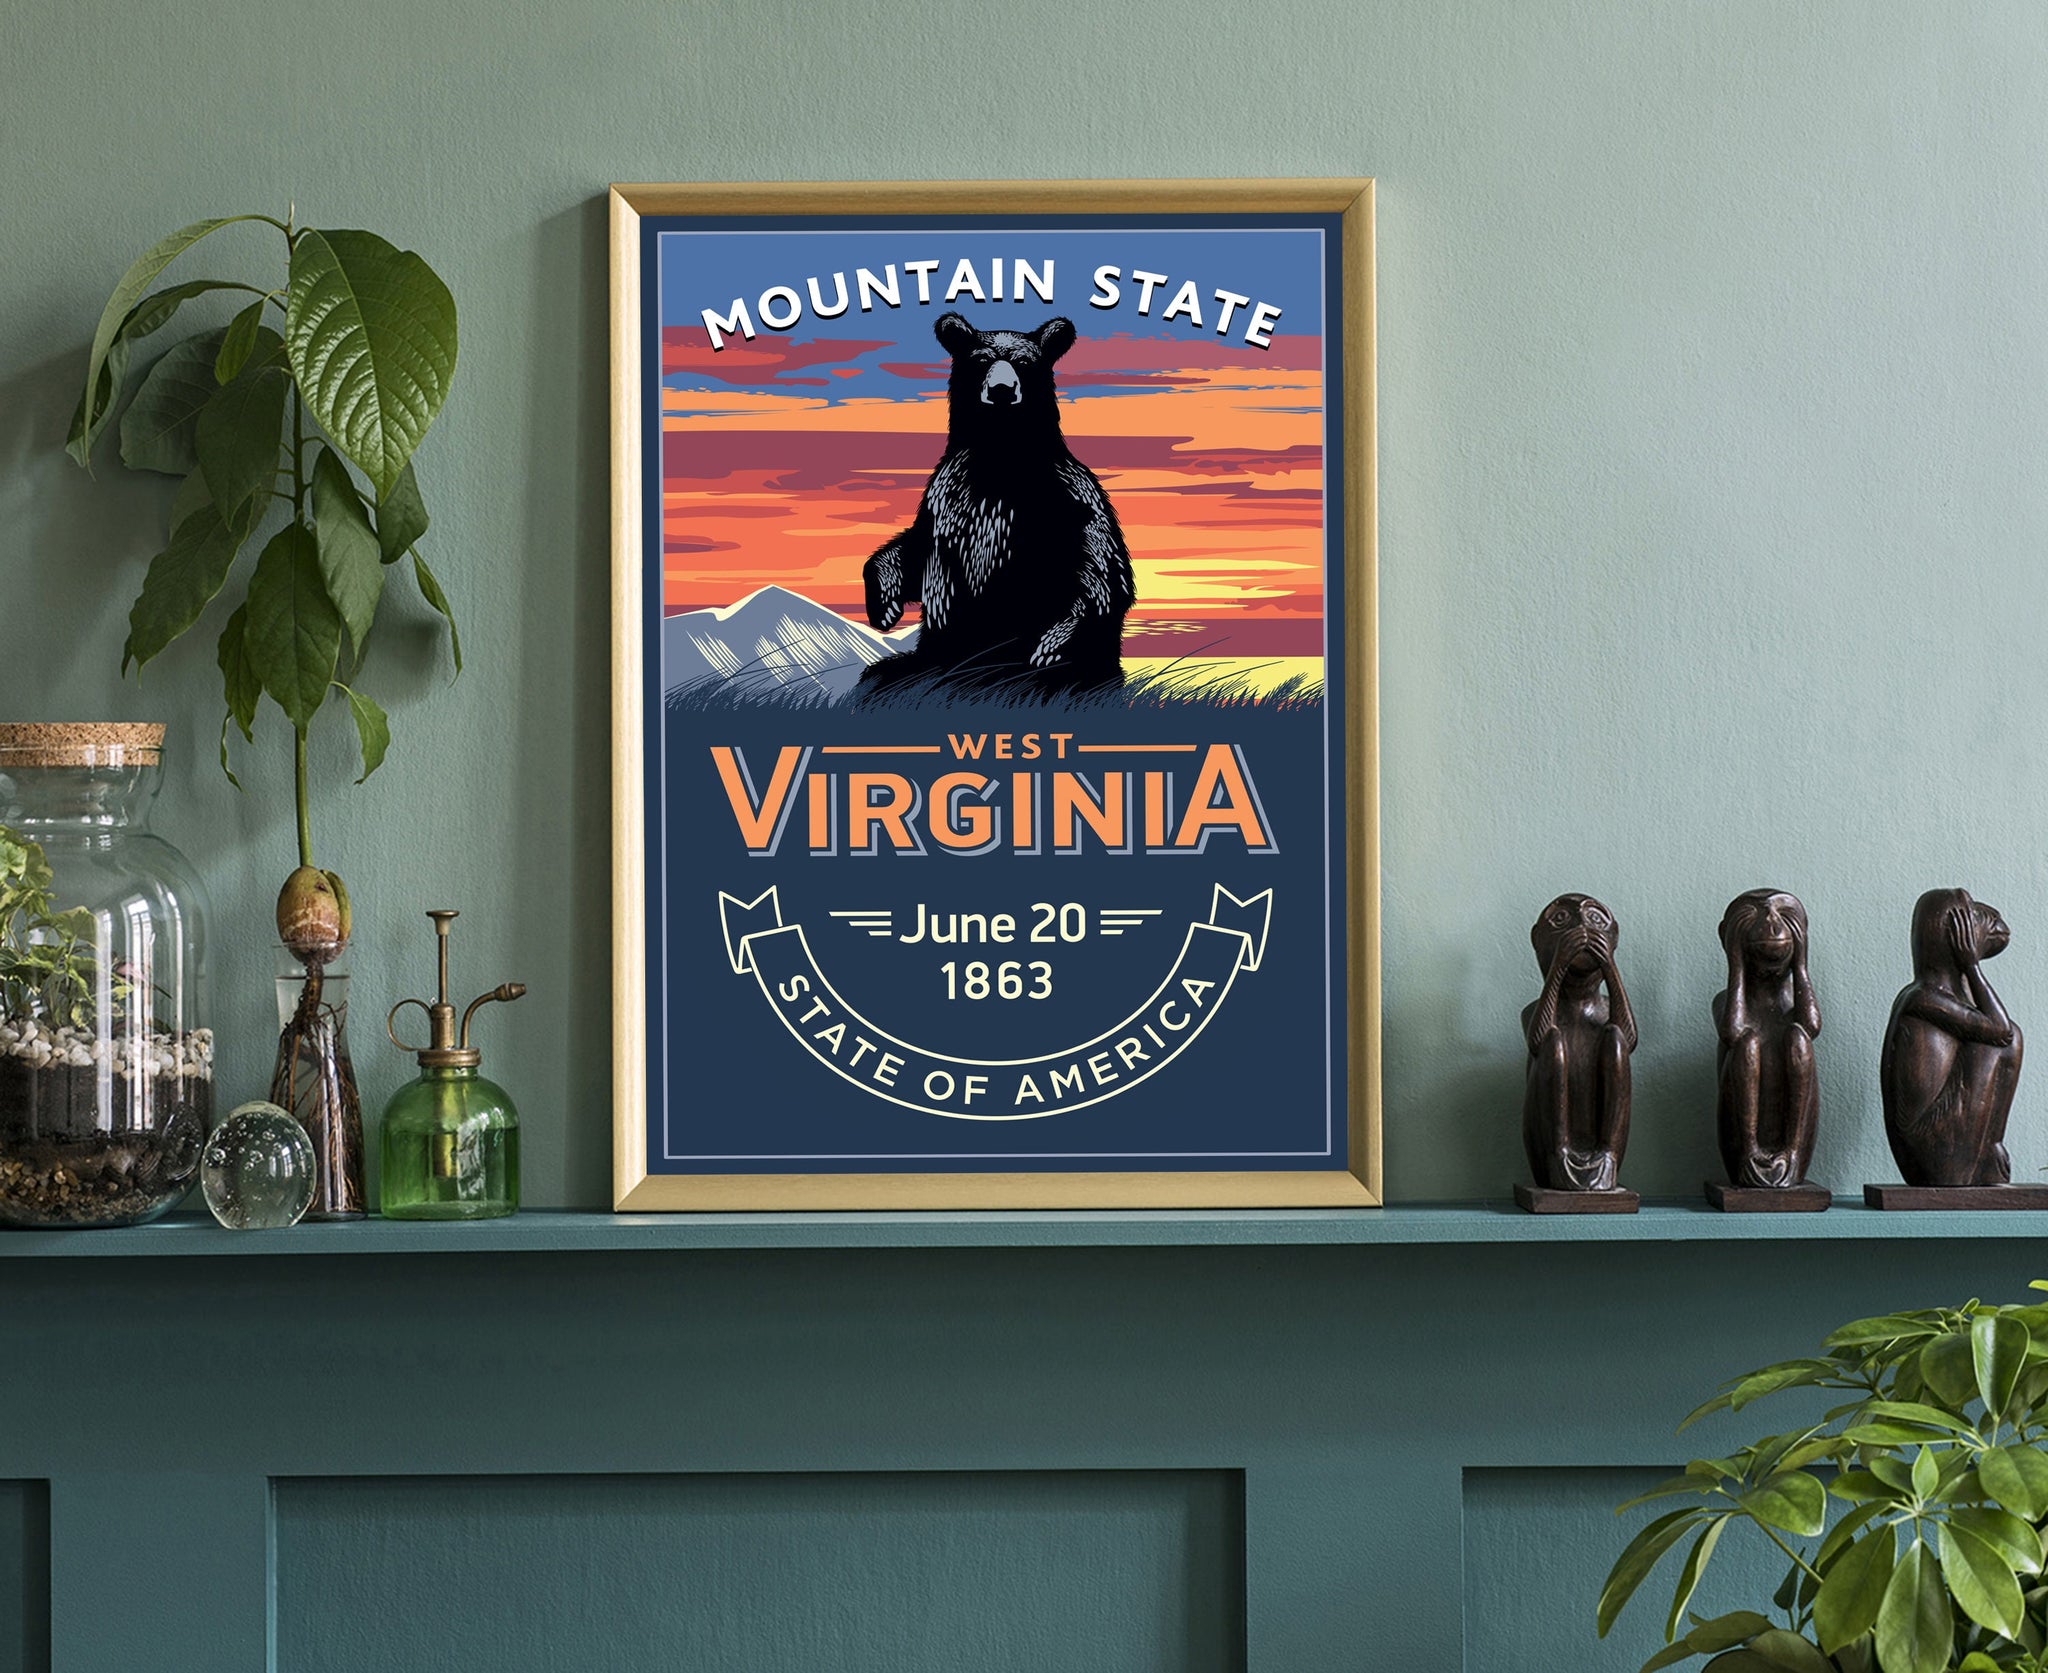 United States Poster, West Virginia State Poster Print, West Virginia State Emblem Poster, Retro Travel State Poster, Home Office Wall Art